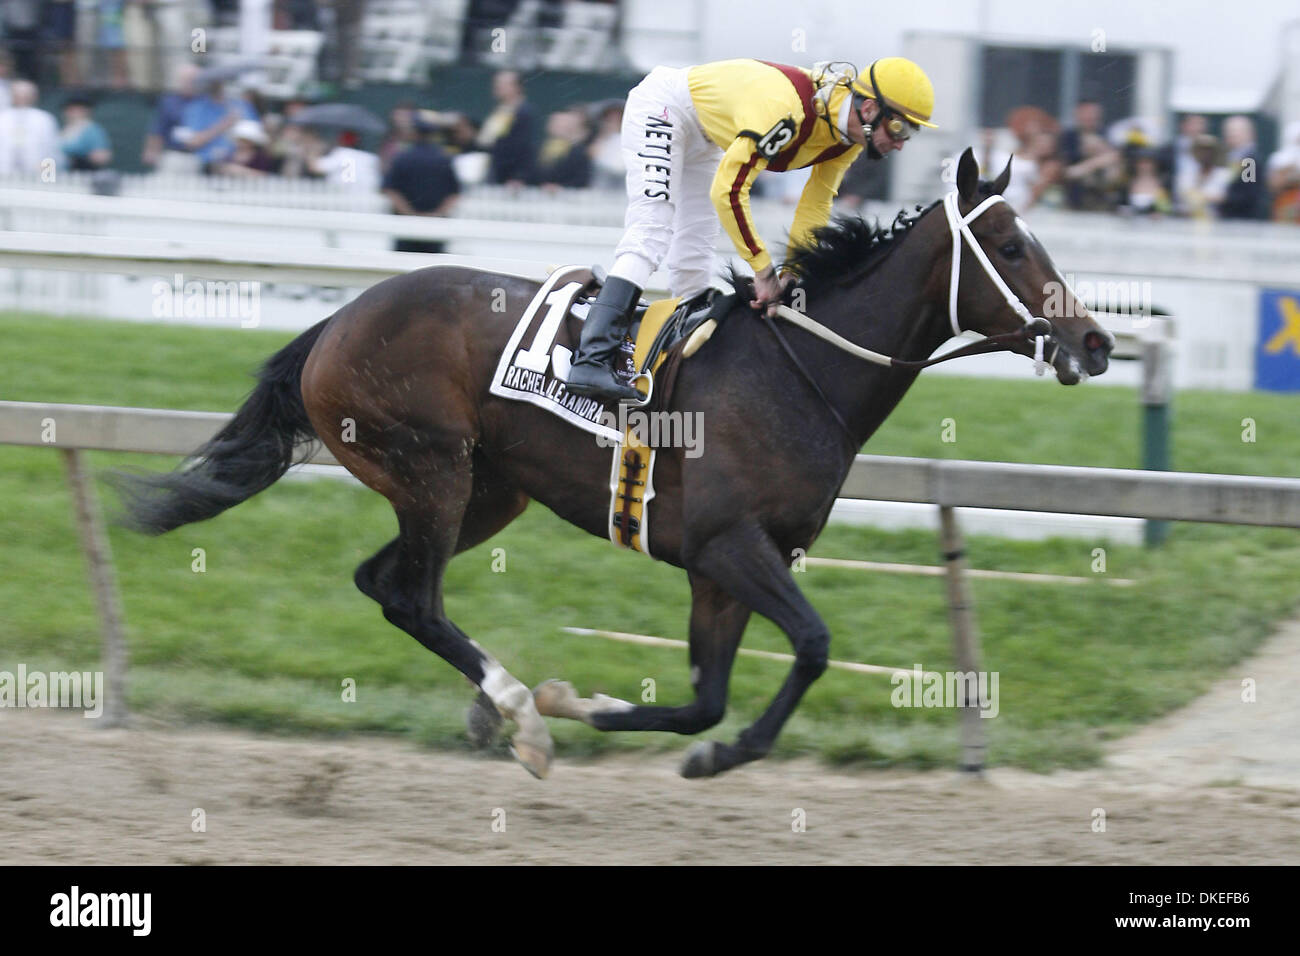 Brady Anderson at the Preakness 